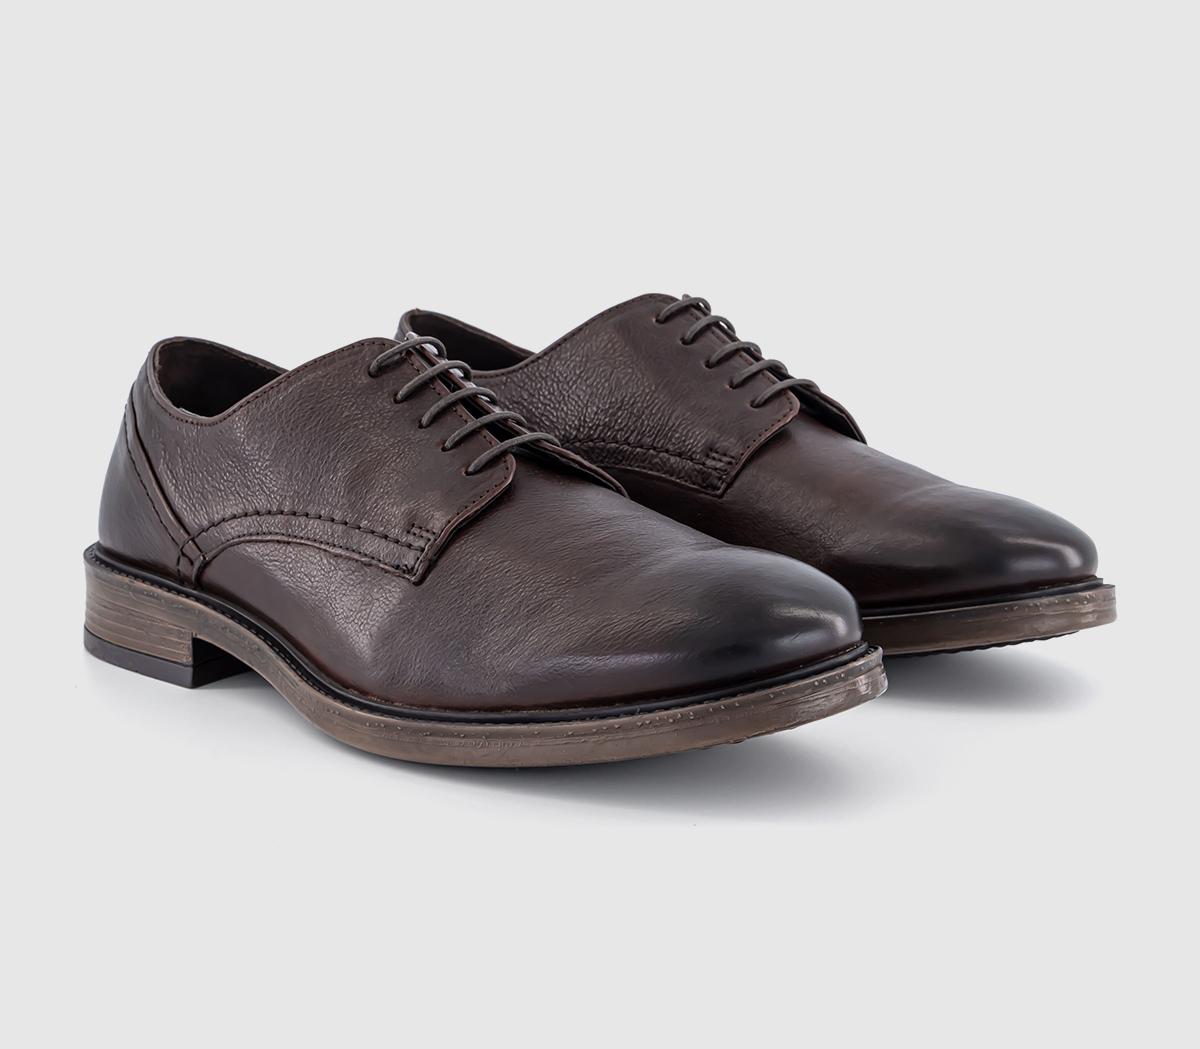 OFFICE Cadeleigh Casual Leather Derby Shoes Brown, 11